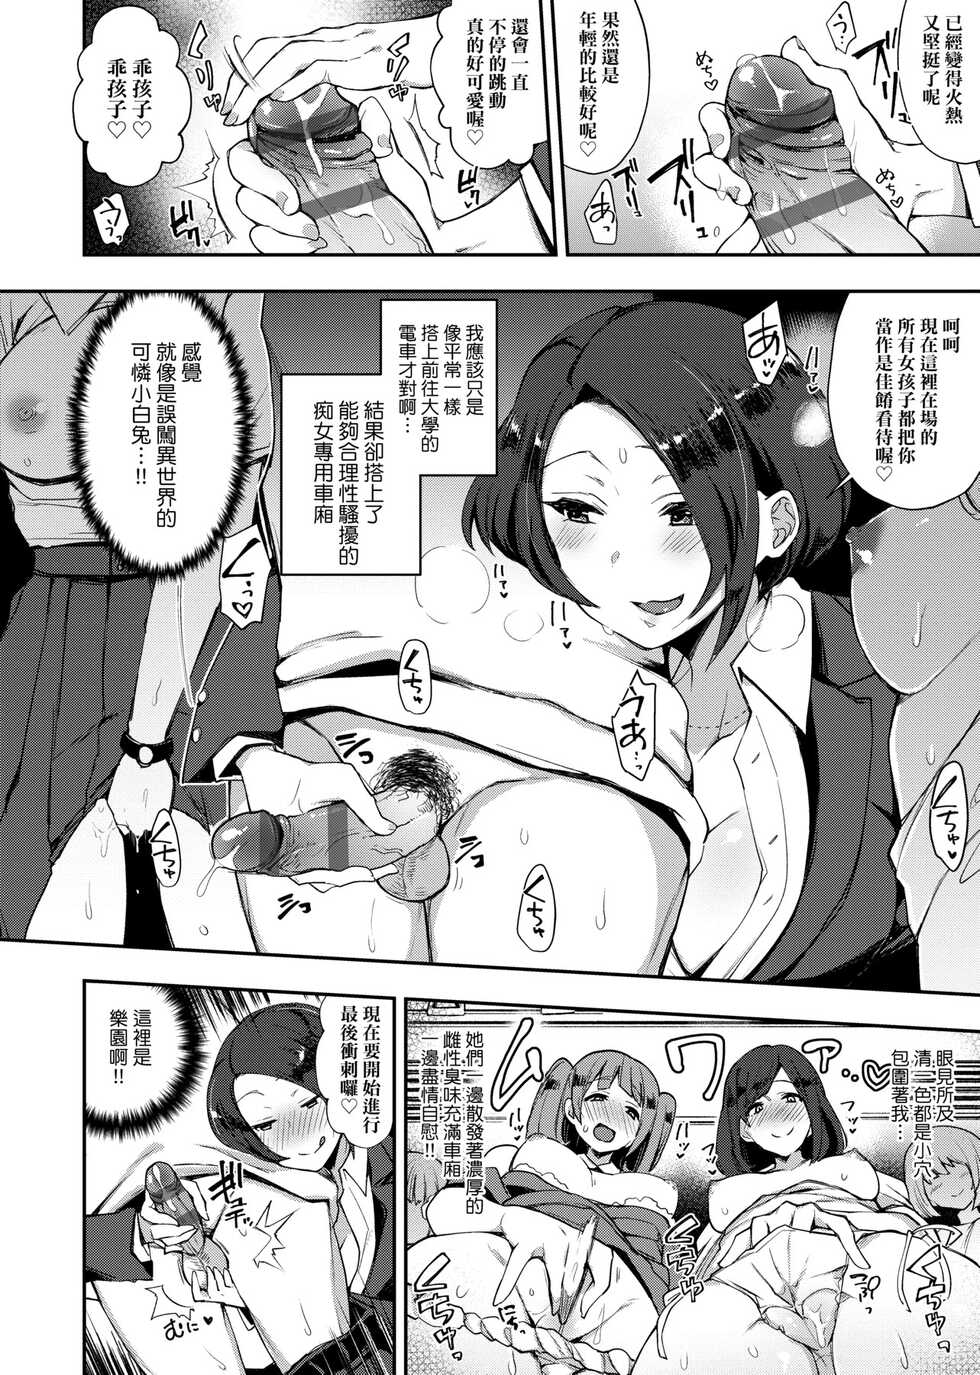 [Indo Curry] BITCH ONLY | 痴女專用車＜Bitch Only＞ 特裝版 [Chinese] [Digital] - Page 13